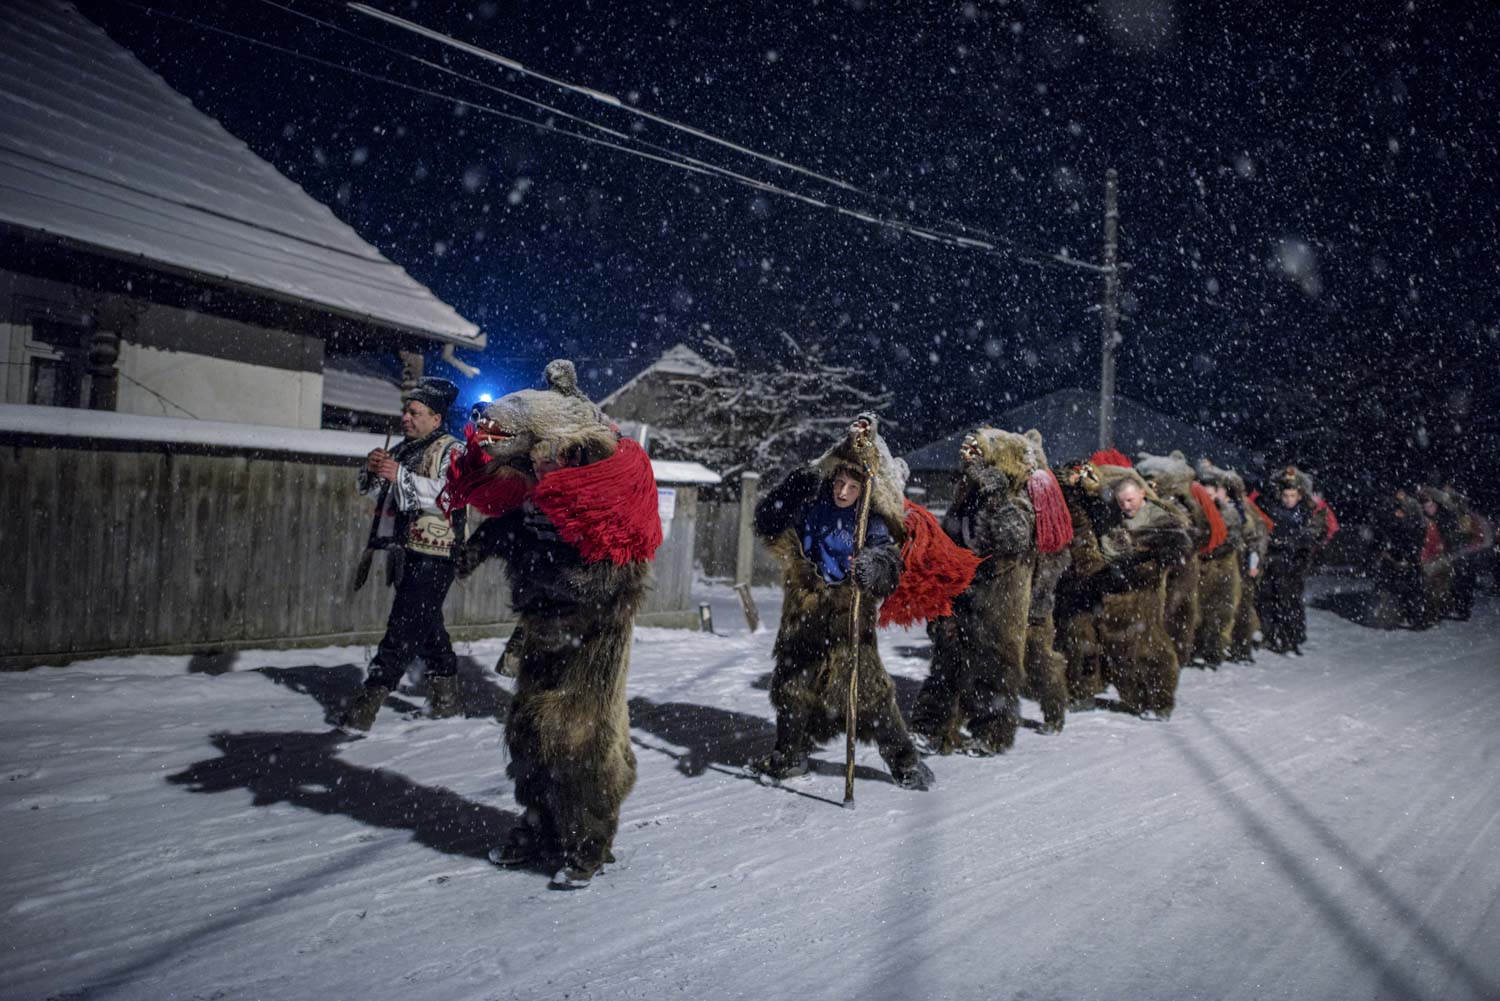  Toloaca's troupe of bears dance their way, single-file into the night, through Asău village, stopping at the private homes where they've been invited to perform. December 28, 2014. Asău village, Bacău County, Romania. 